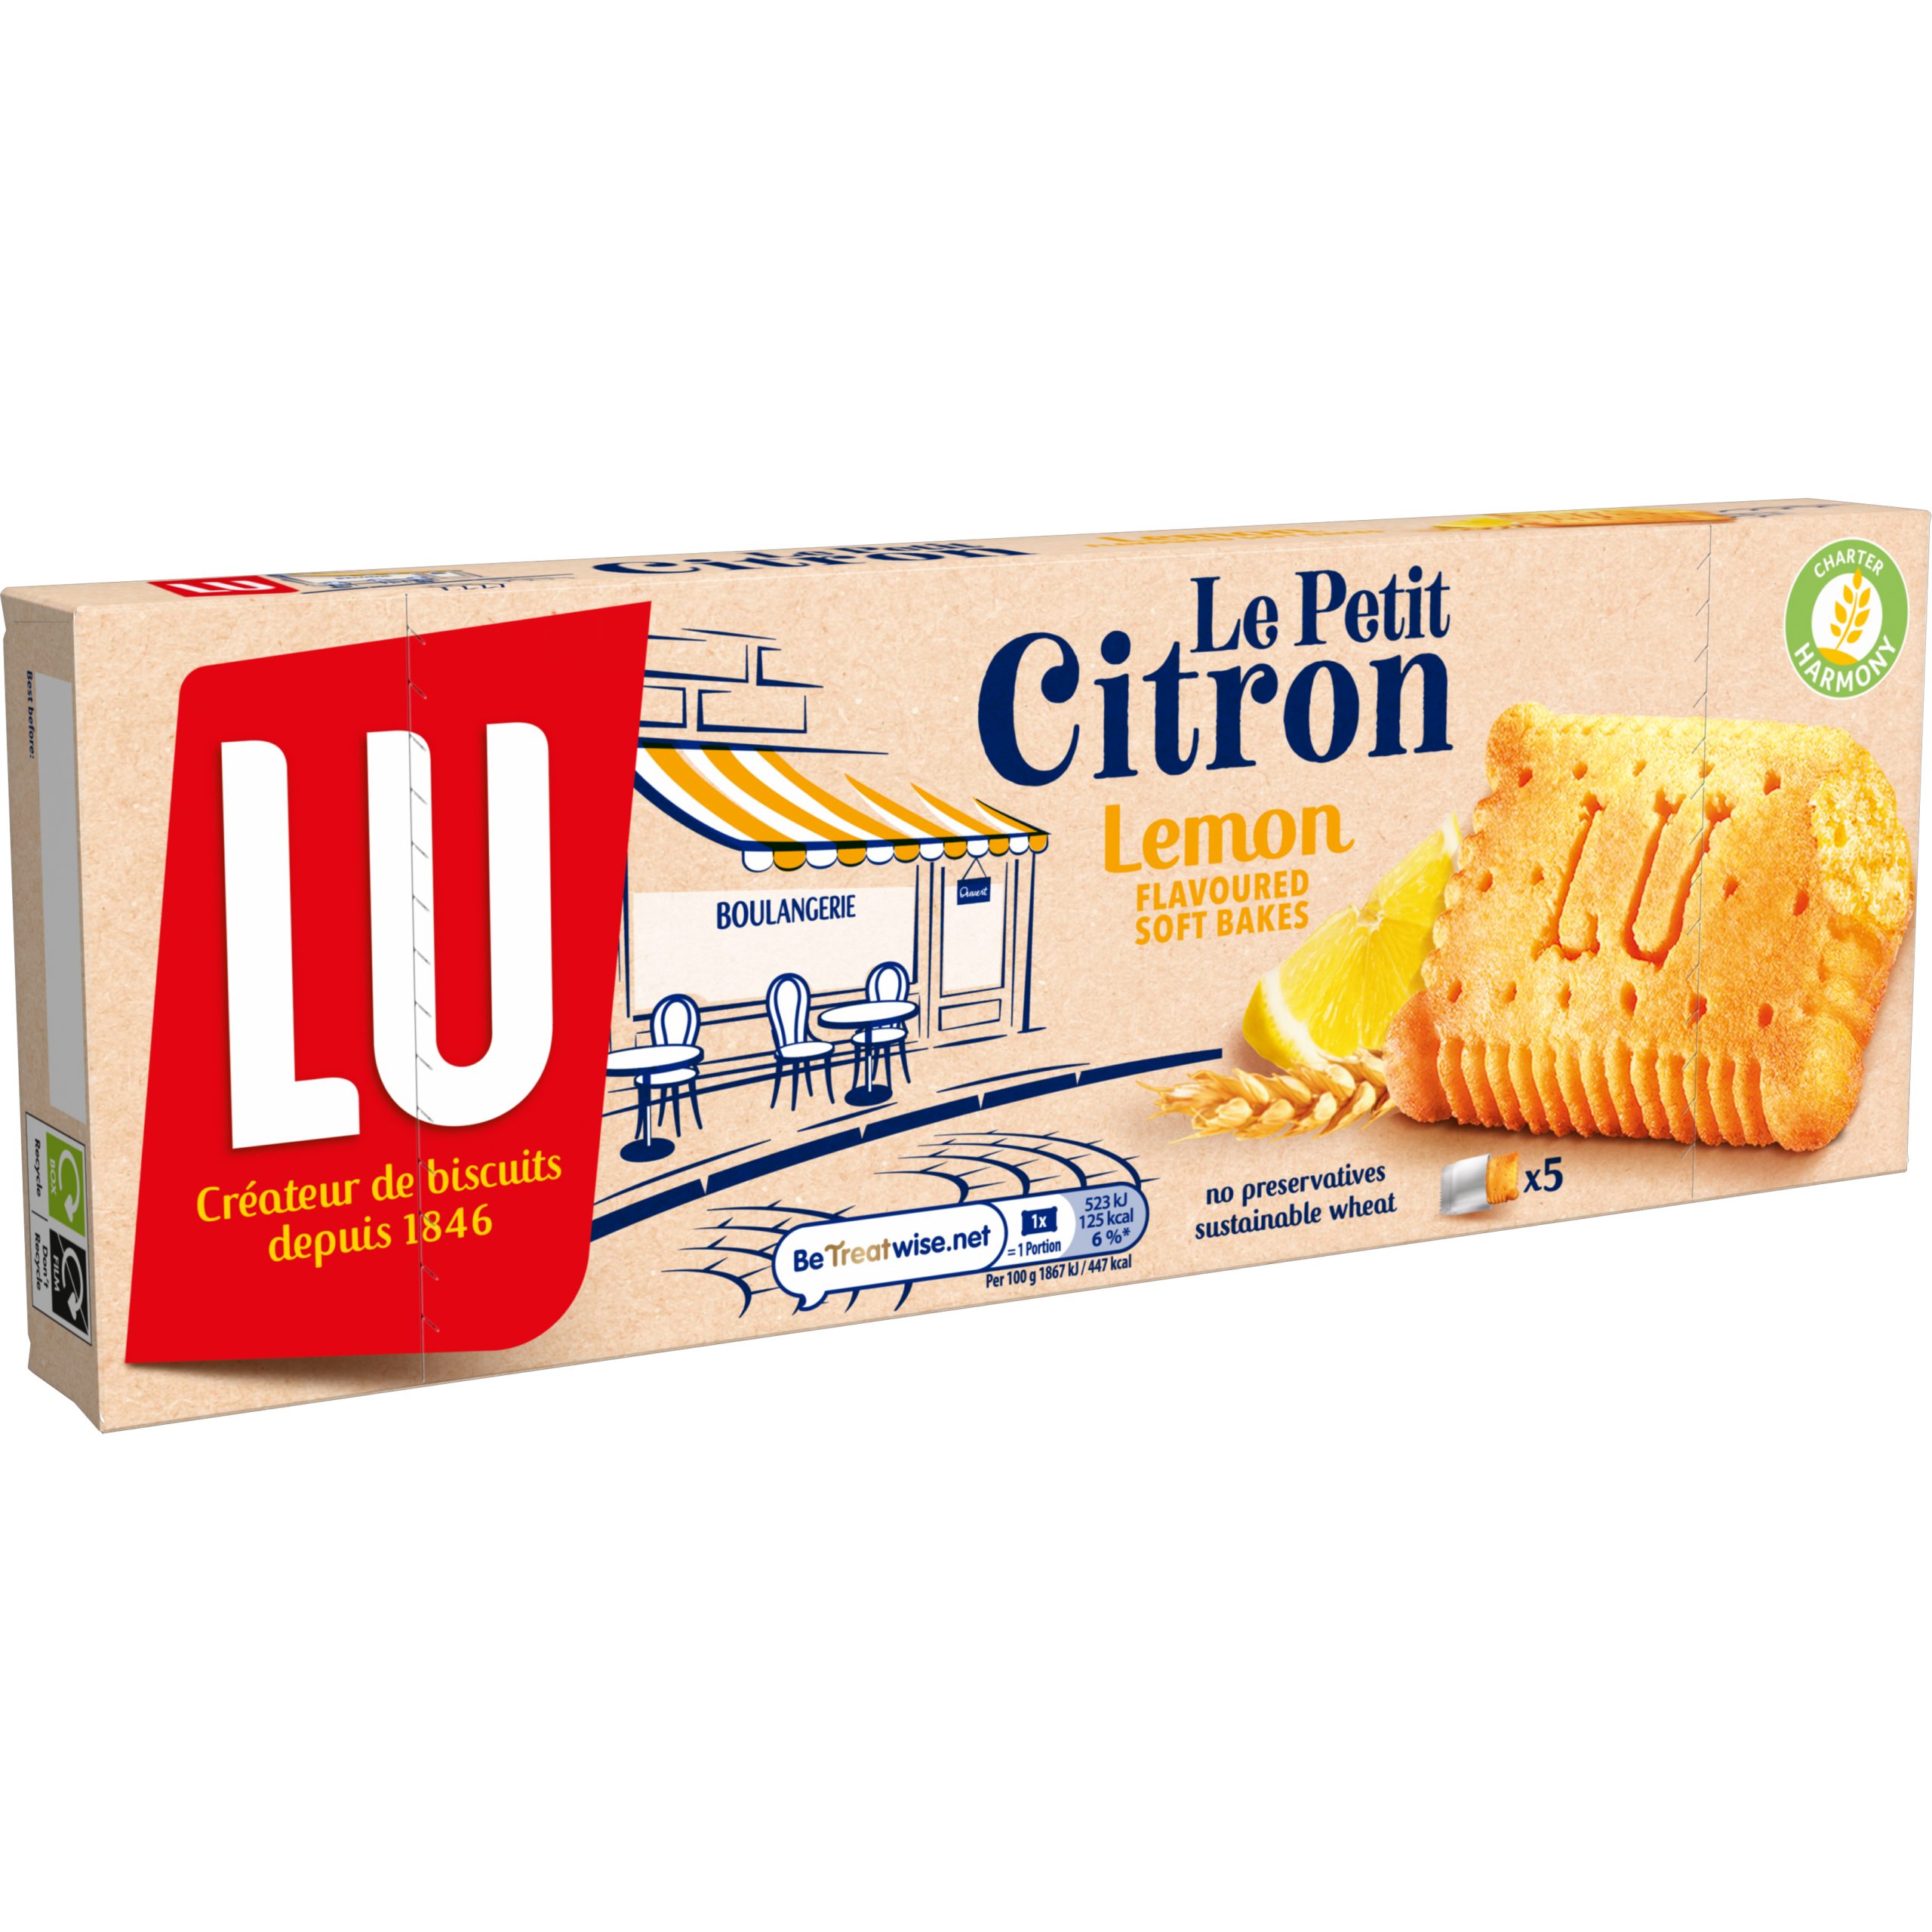 Renowned French biscuit brand, LU, to launch in the UK